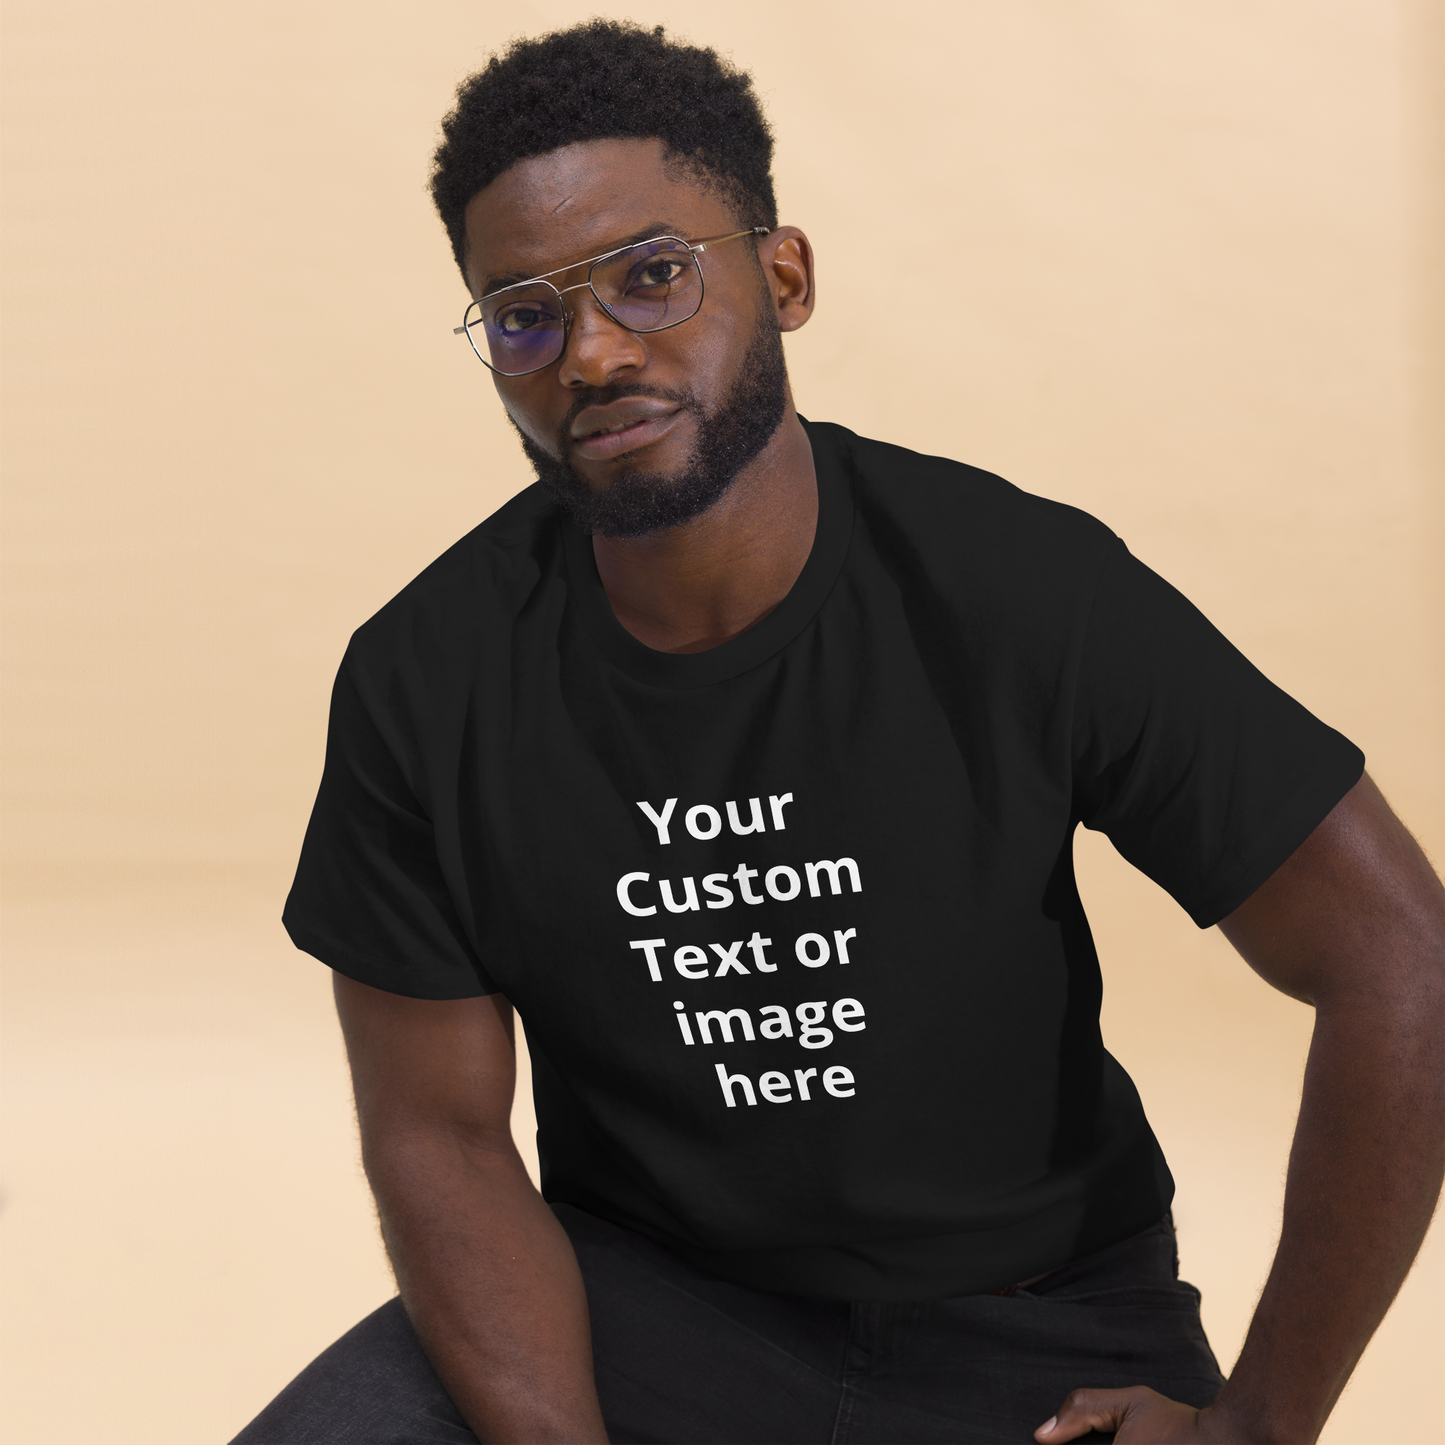 Personalised Custom T shirt with Custom message or image - Just send your text or image